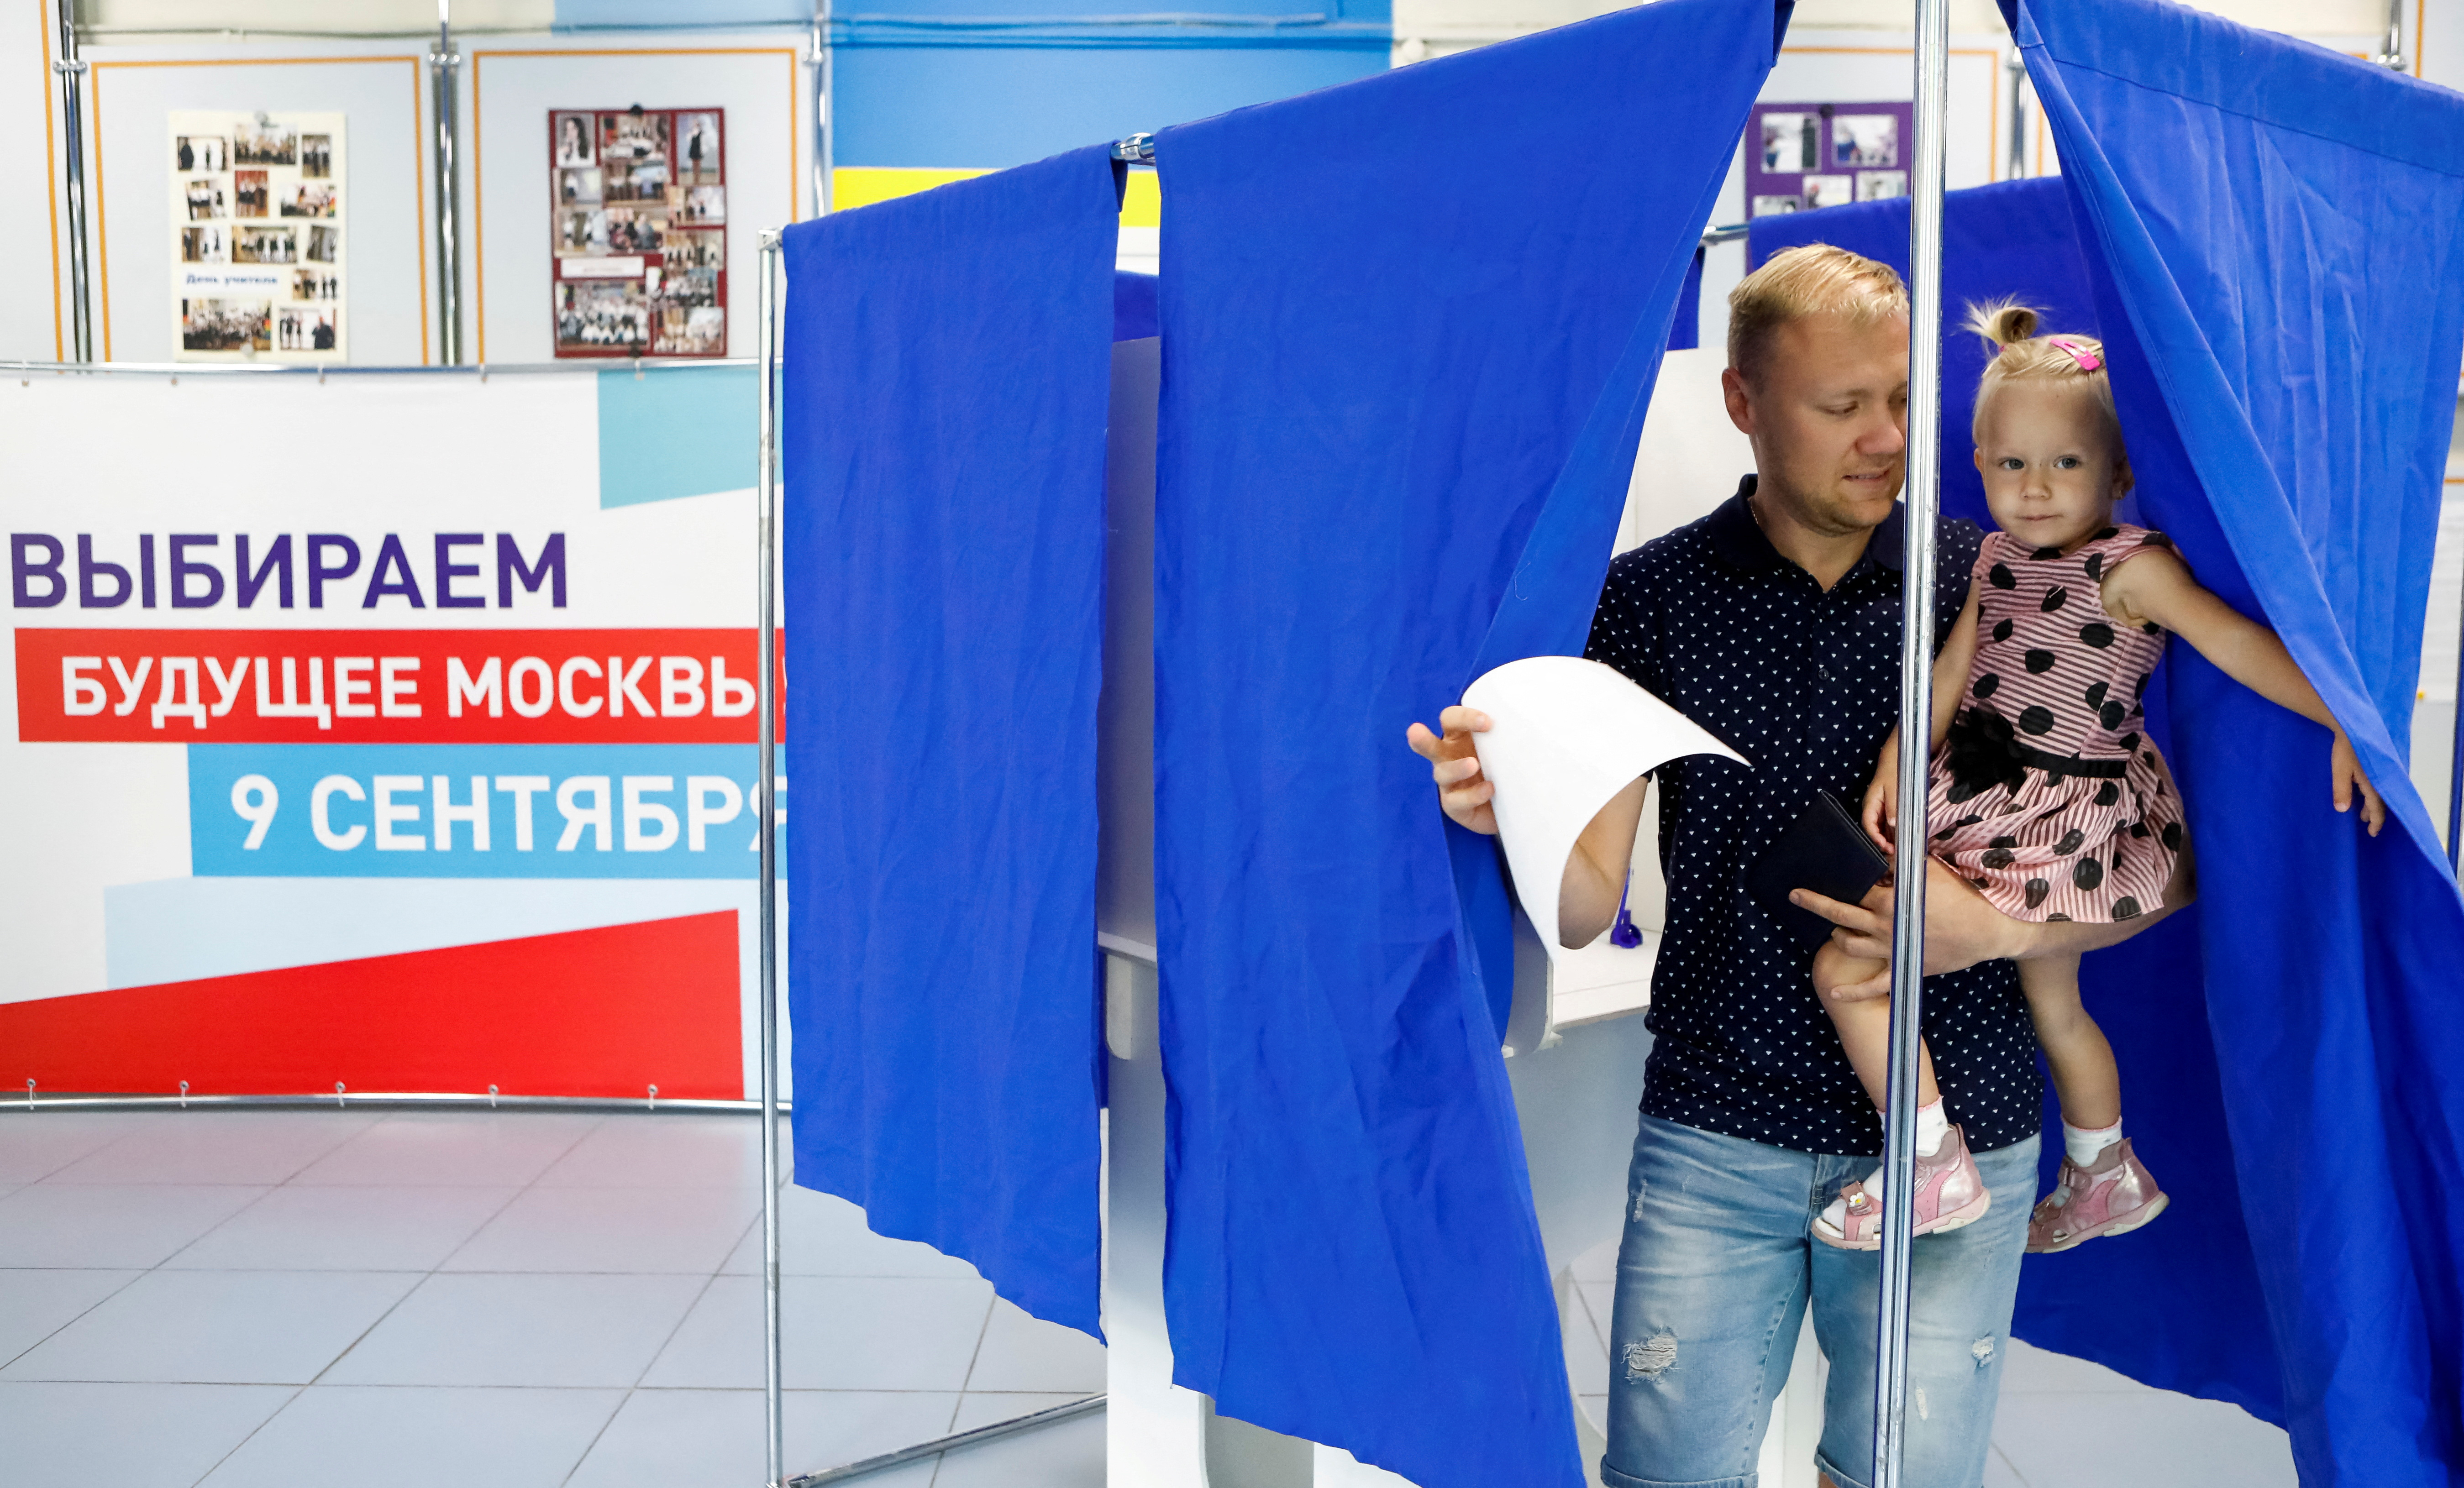 A man leaves a voting booth during mayor election at a polling station in Moscow